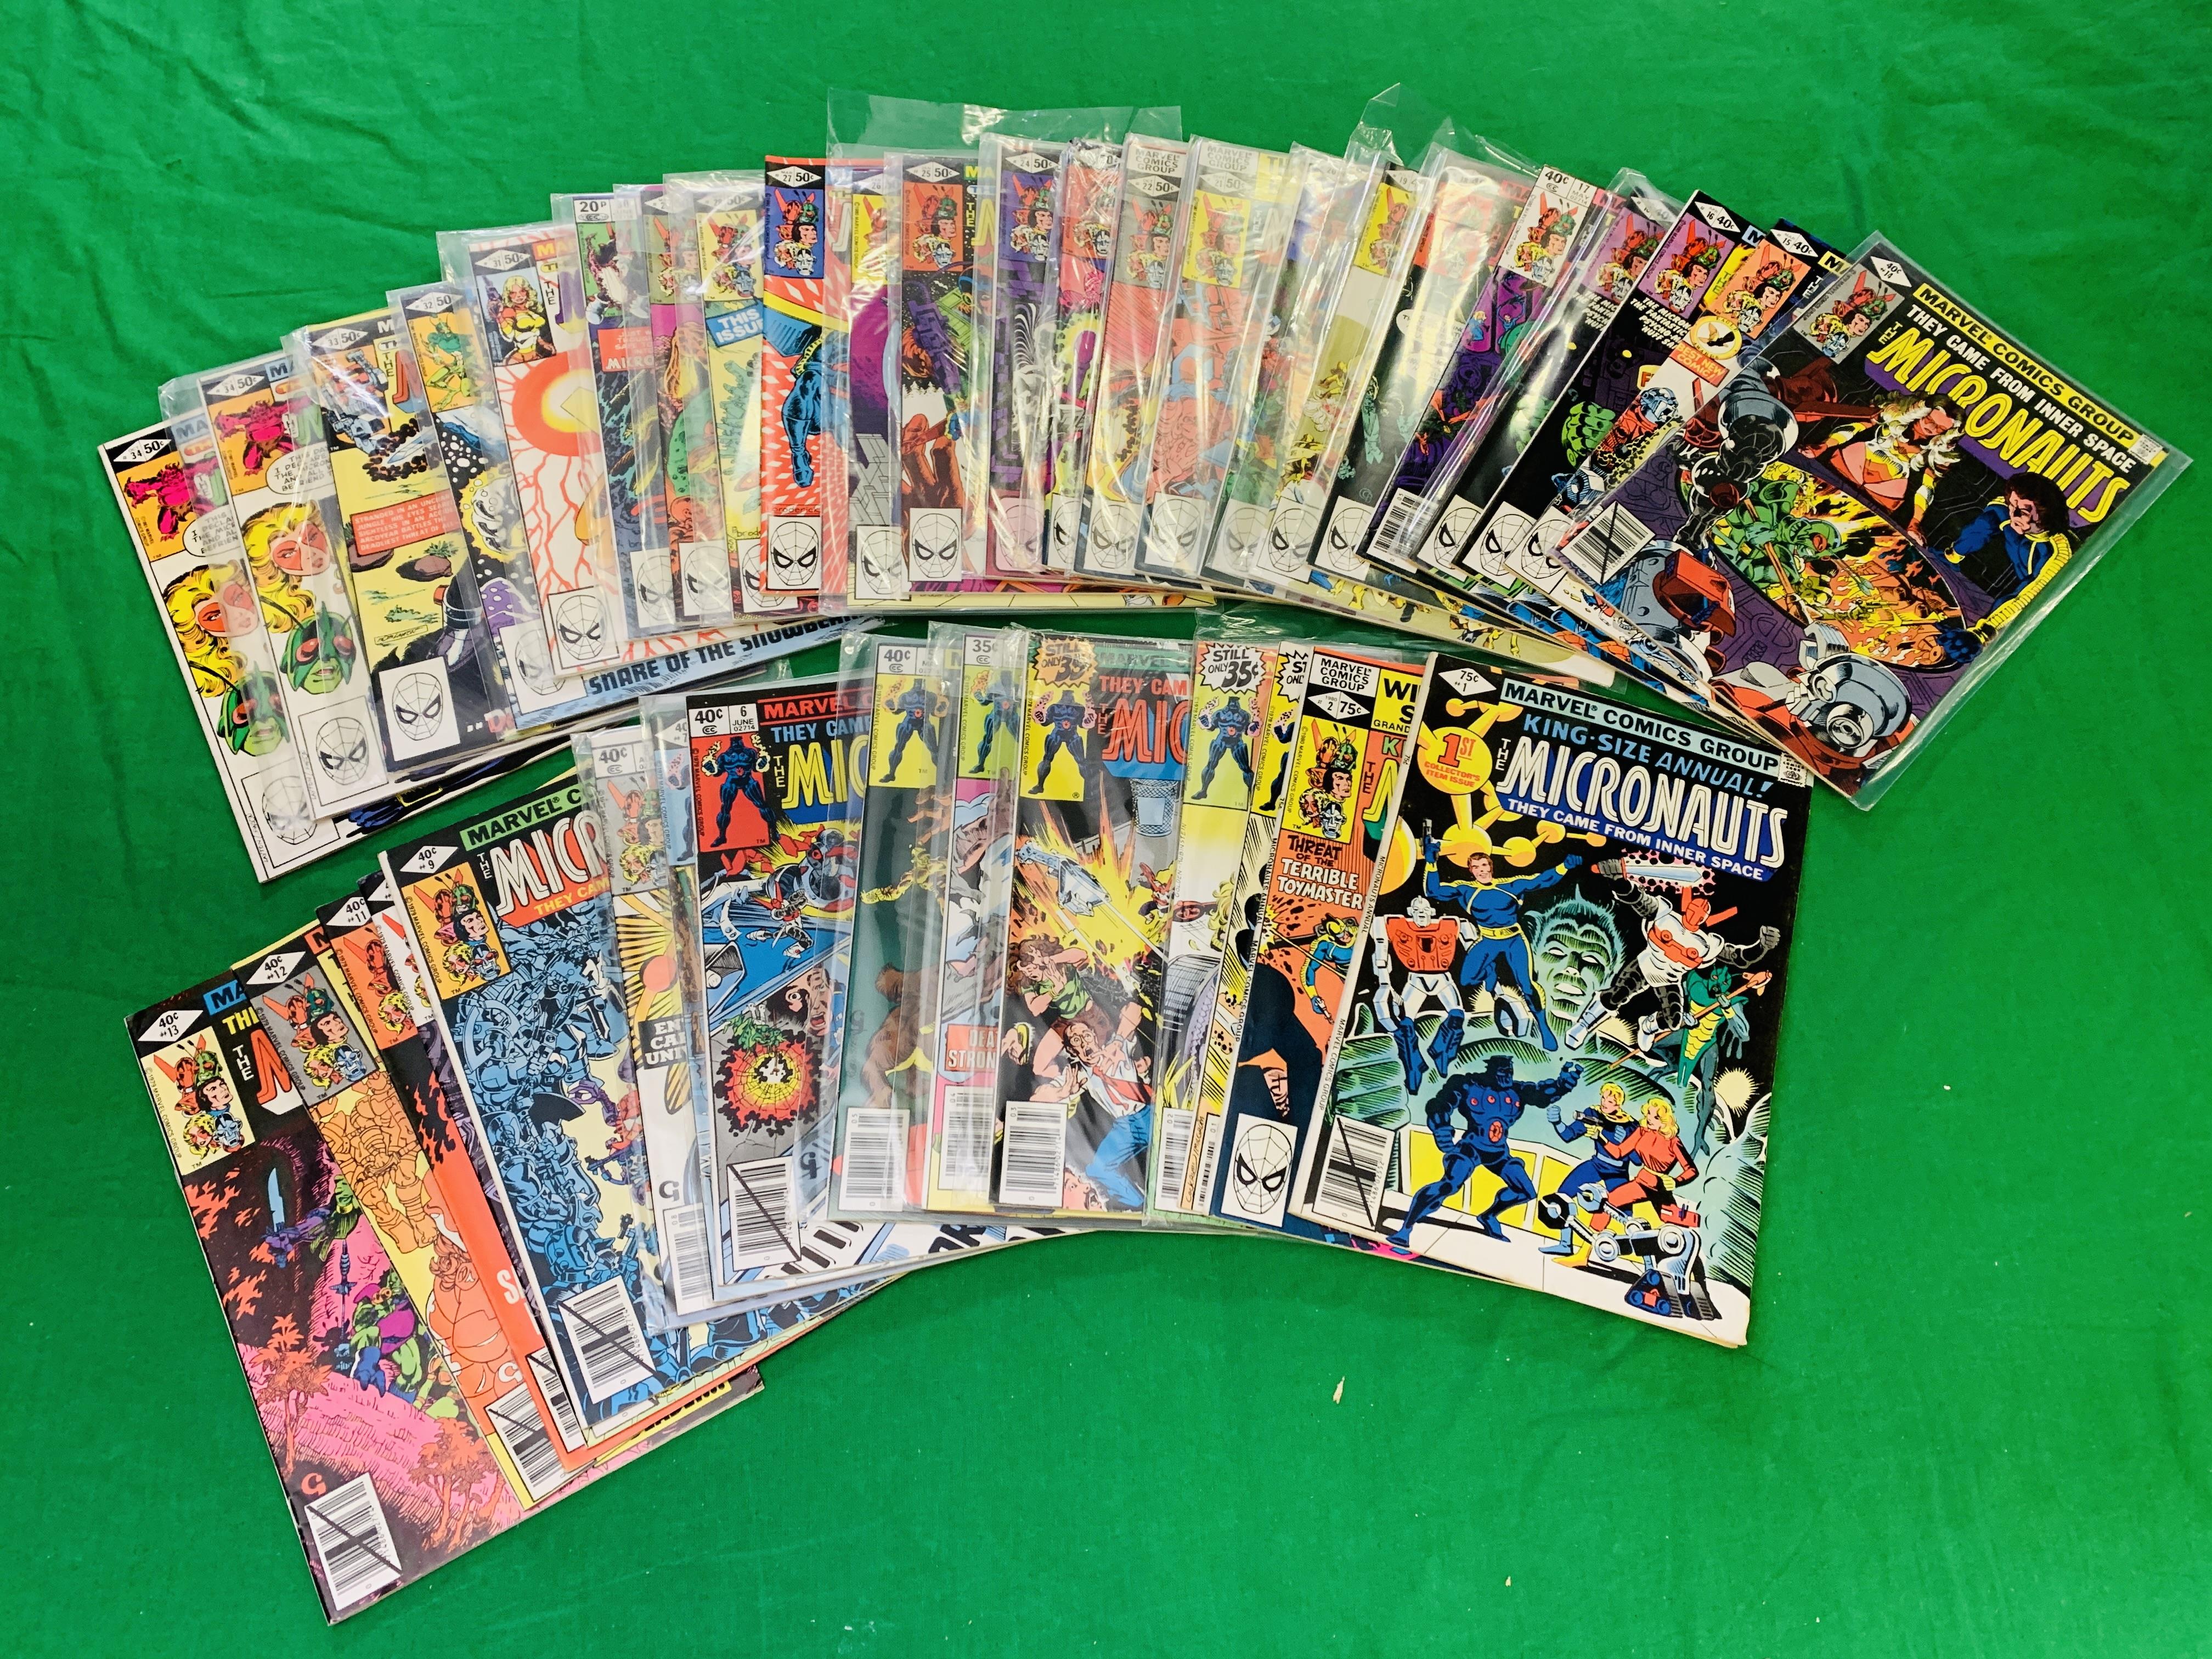 MARVEL COMICS THE MICRONAUTS NO. 1 - 59 FROM 1979. NO. 18 - 19, 21, 37, 53, 57 HAVE RUSTY STAPLES. - Image 15 of 27